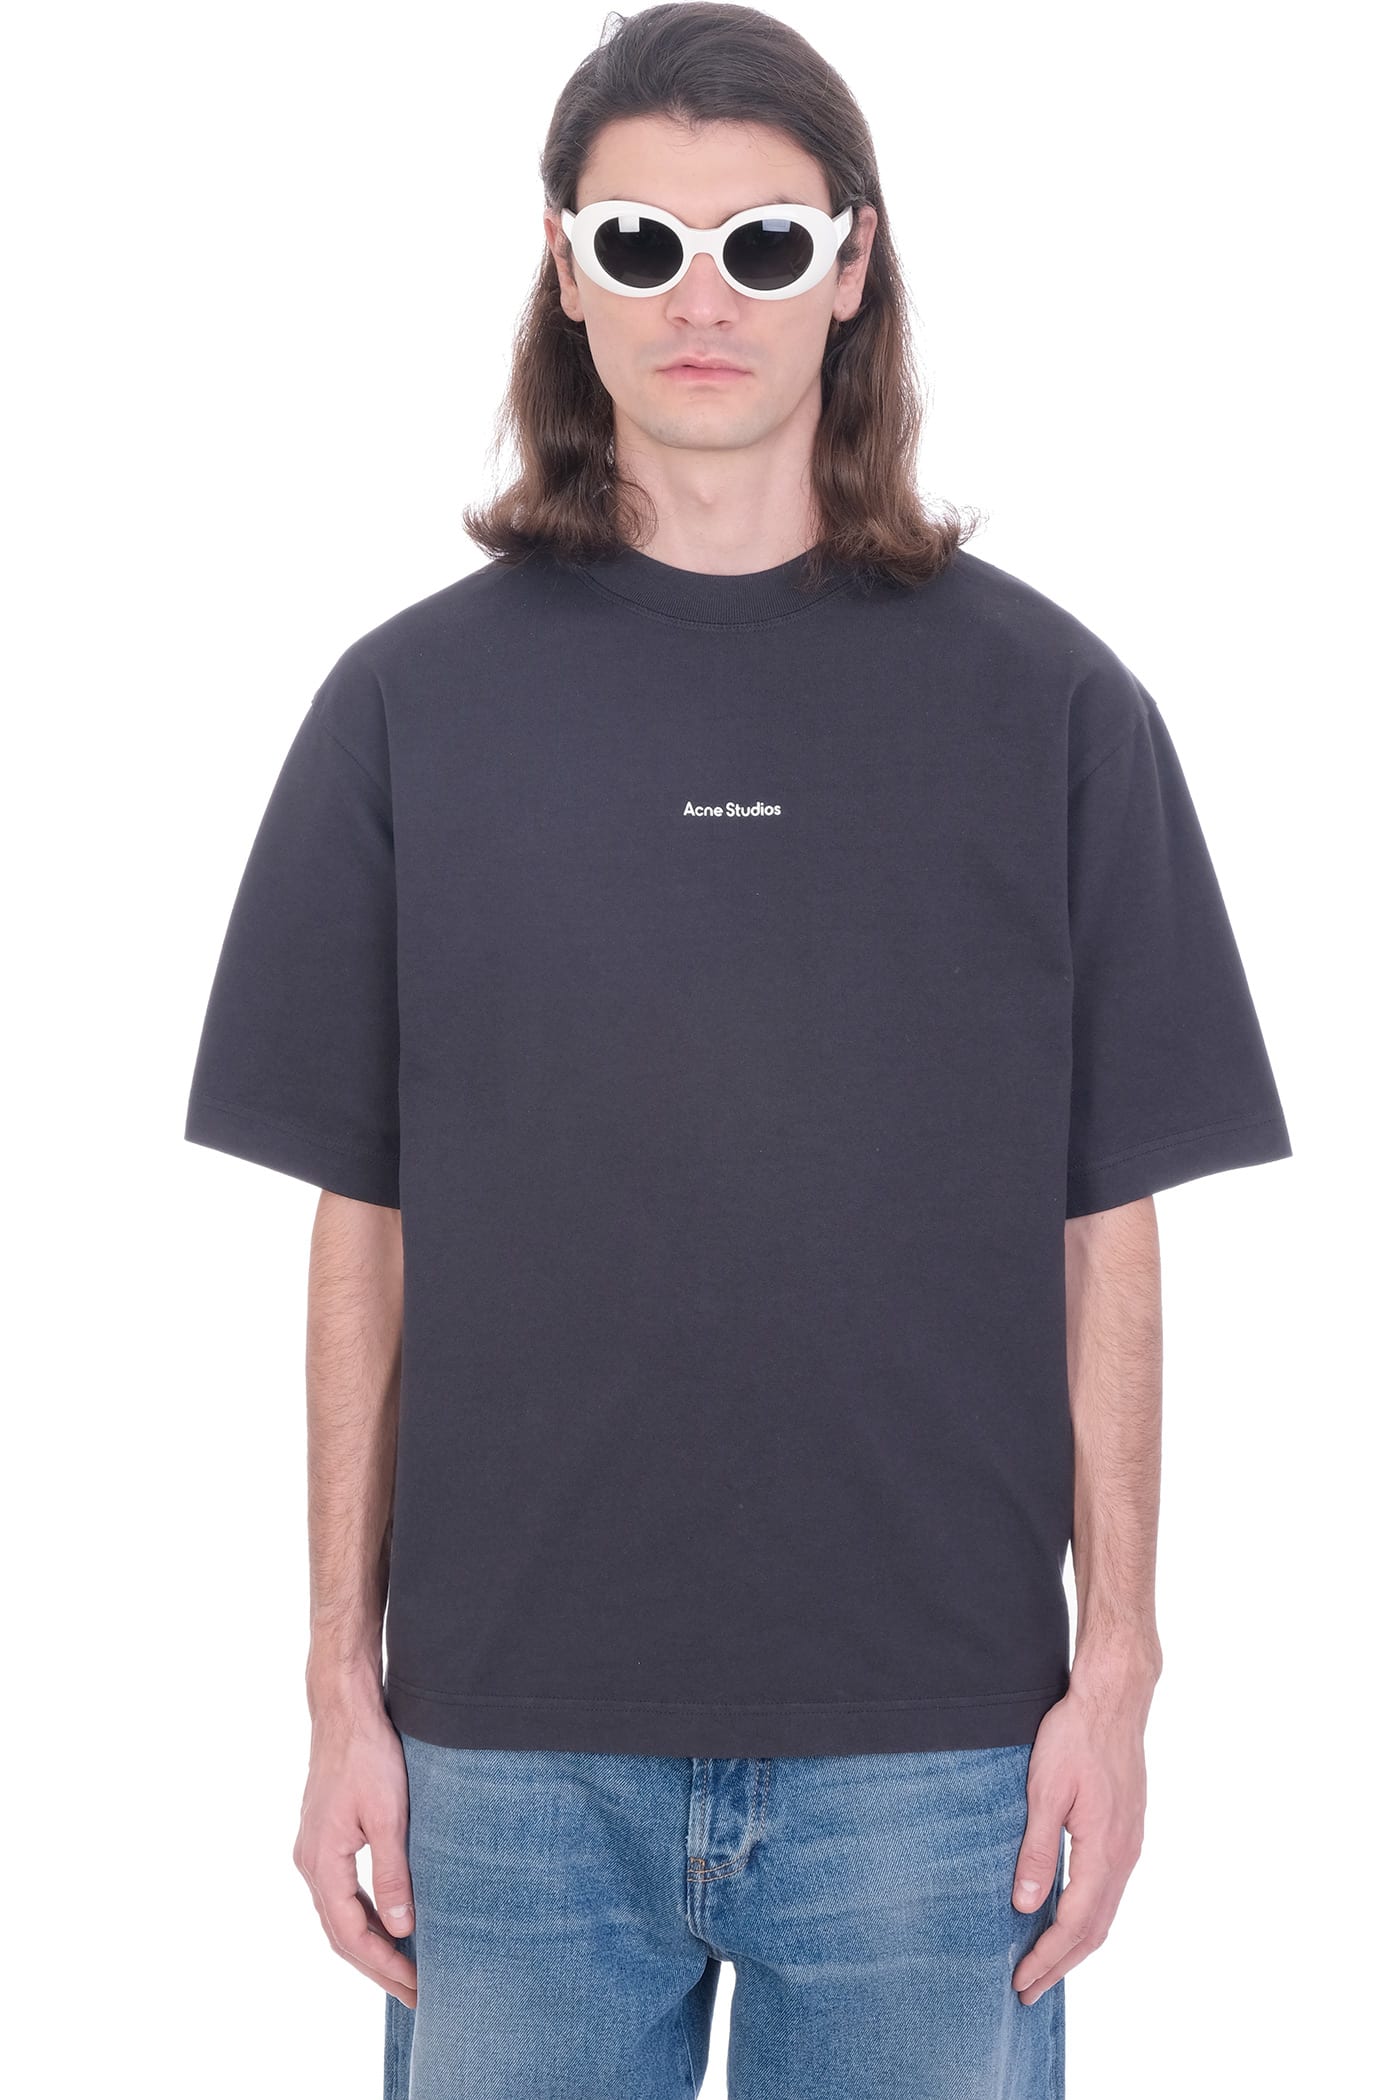 Acne Studios Extor Stamp T-shirt In Black Cotton